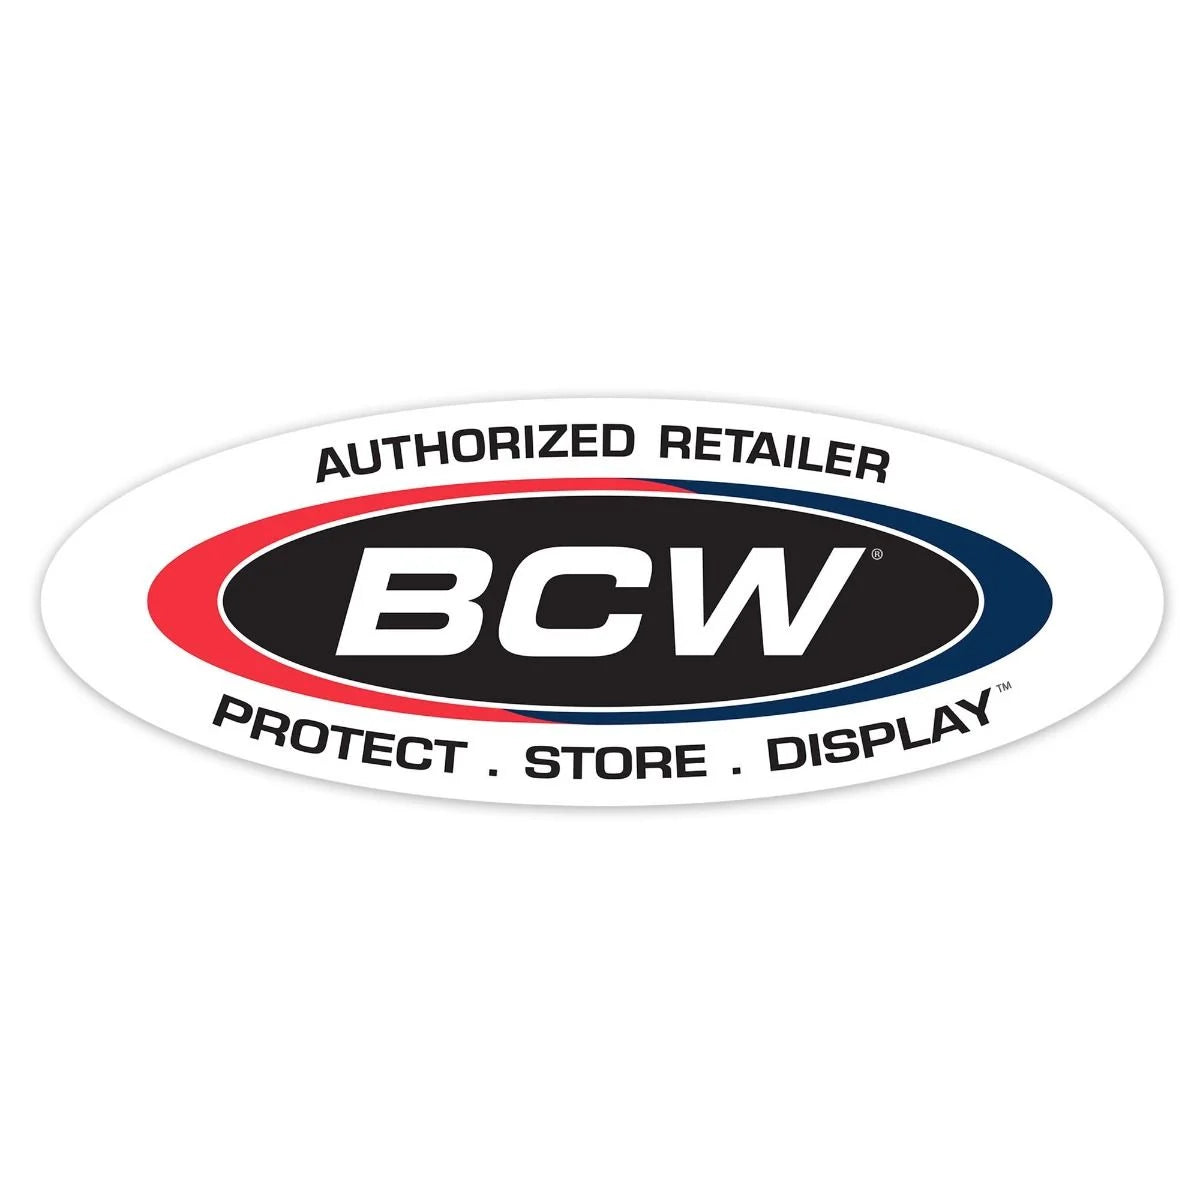 BCW - Card Sleeves (100ct) - Standard size (2 5/8'' x 3 5/8'') - 0